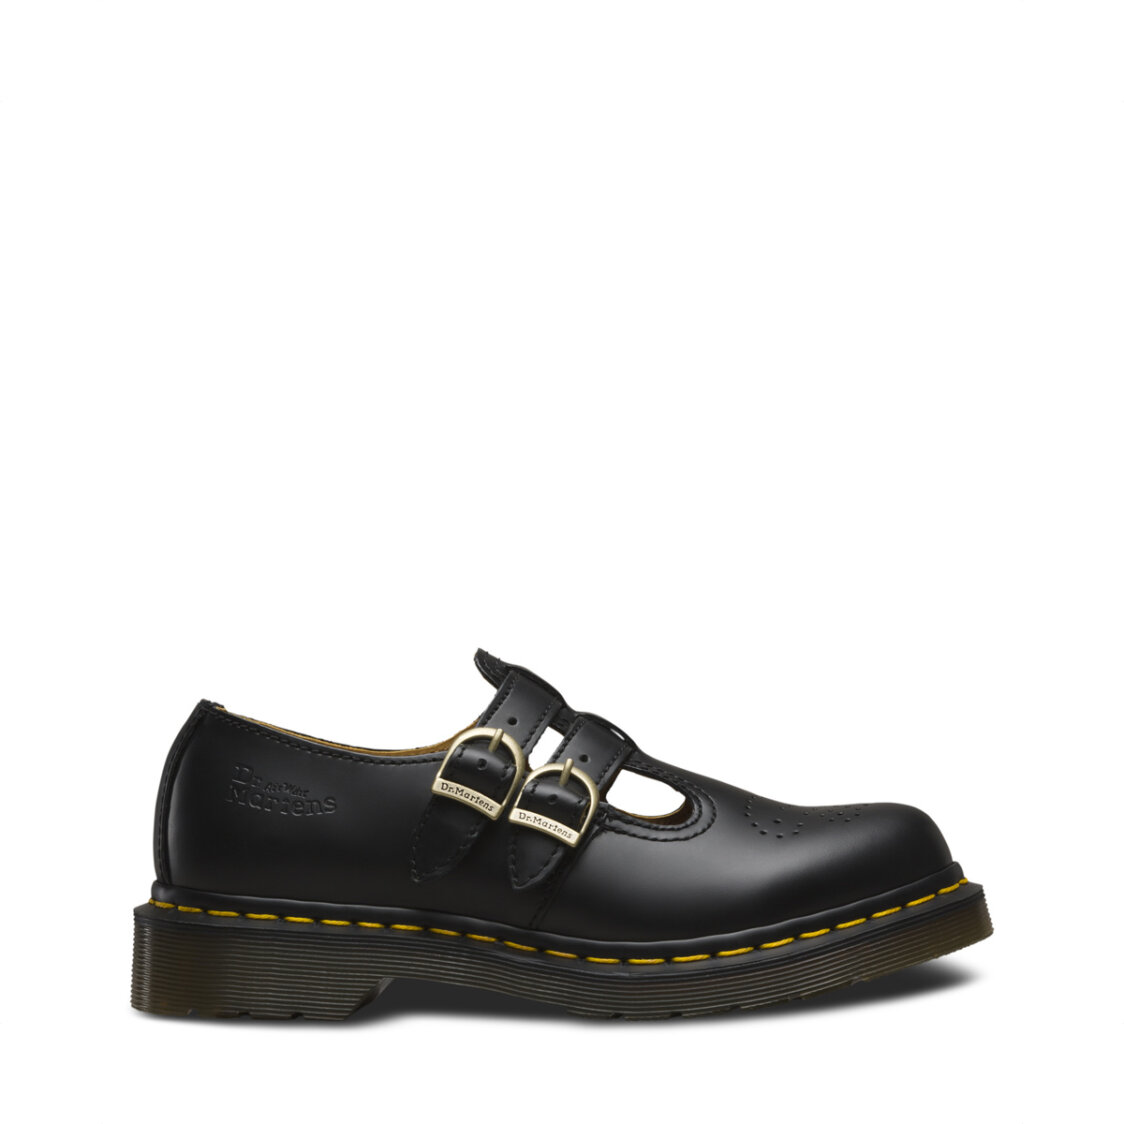 Dr Marten 8065 Smooth Leather Mary Jane Shoes Metro Department Store